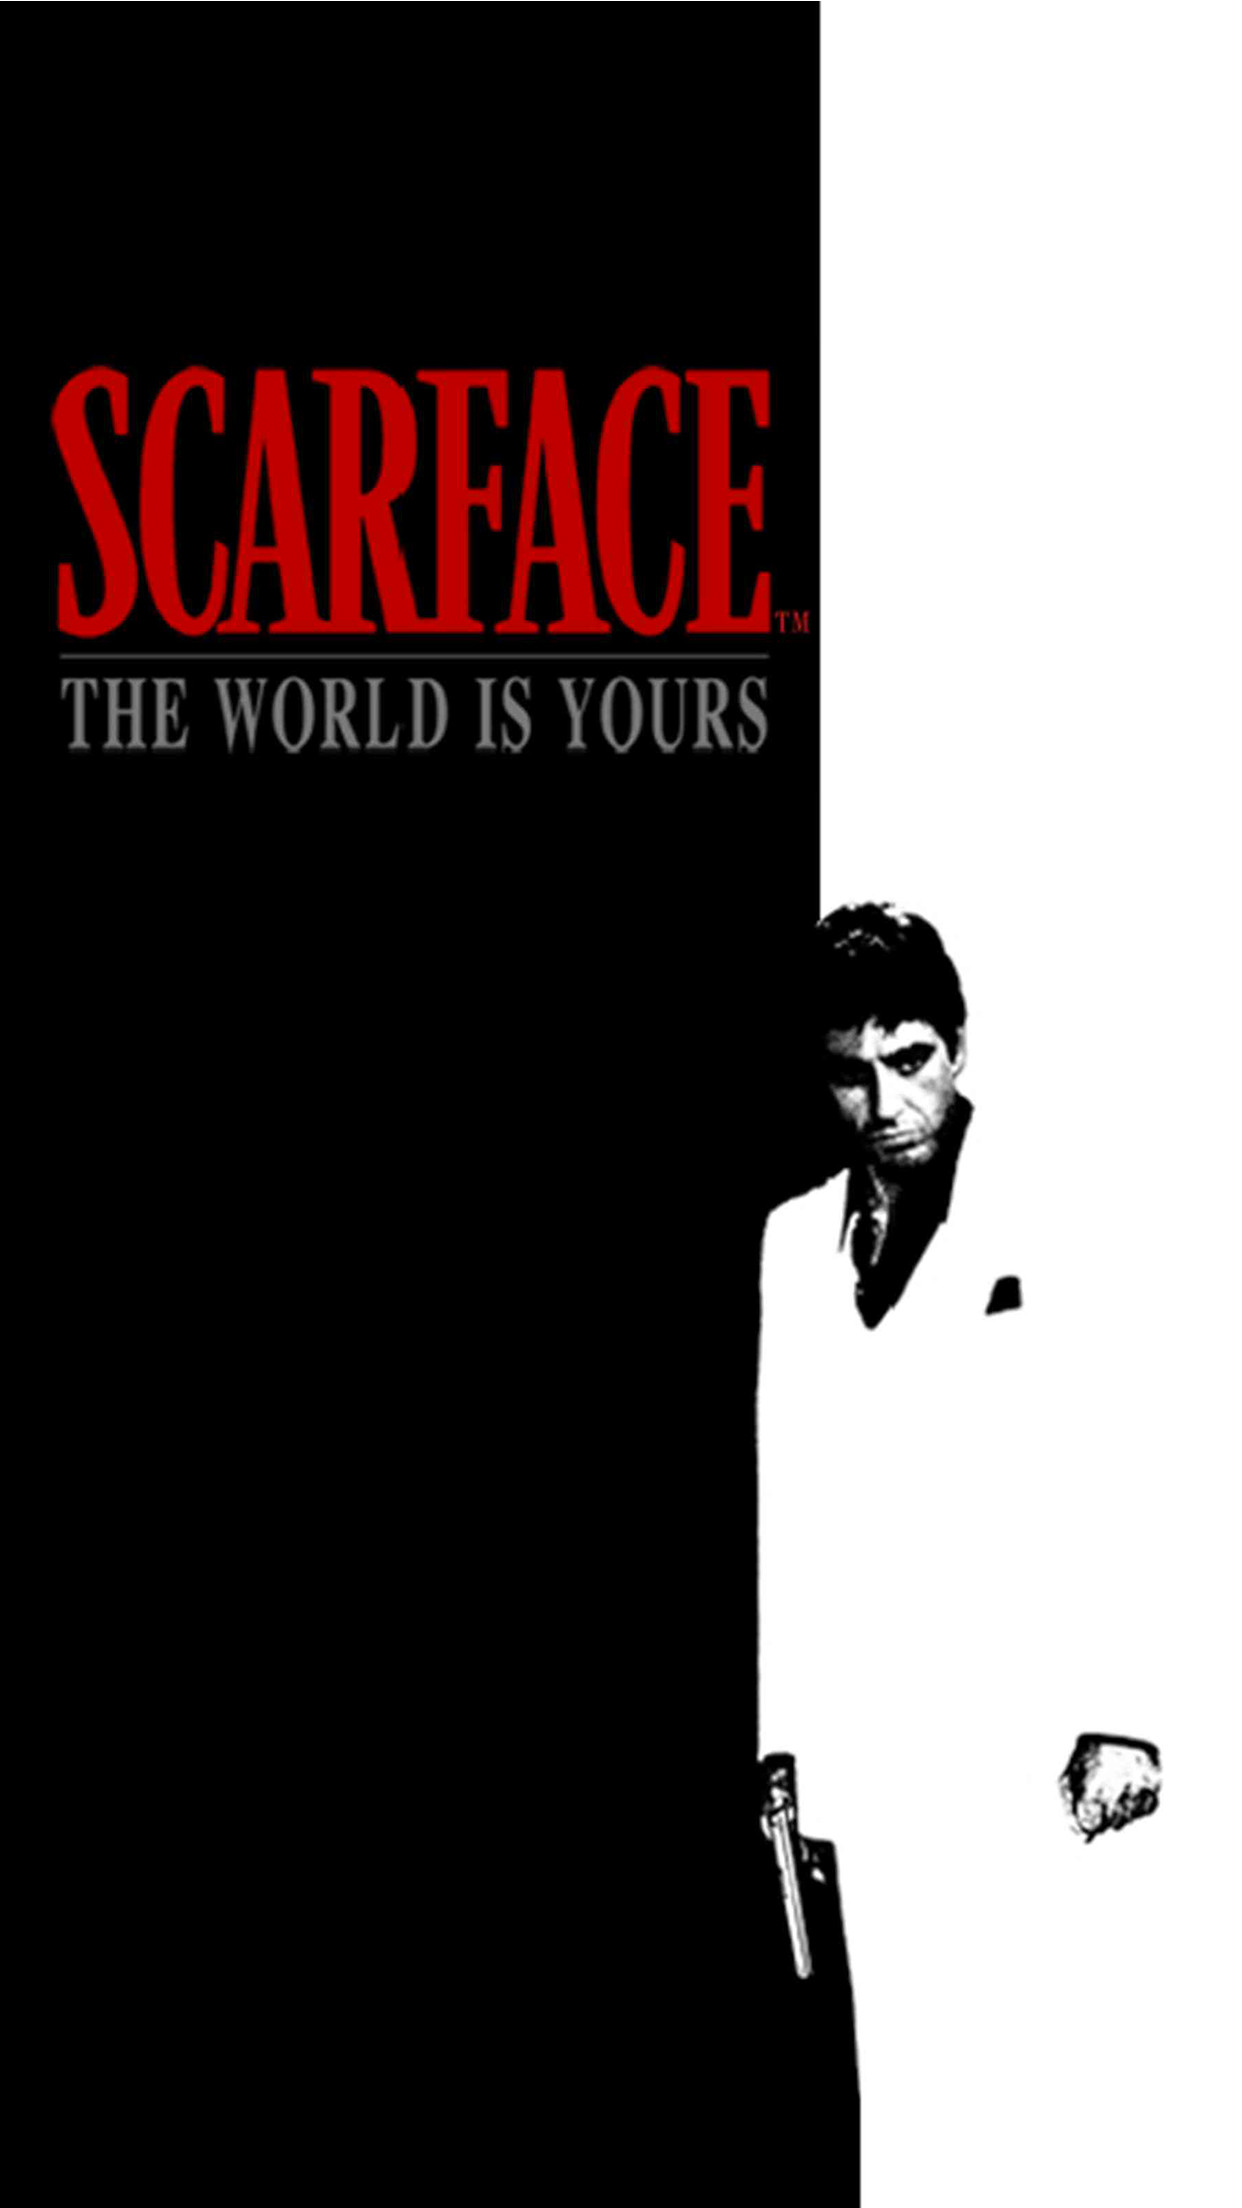 IZM Al Pacino The World is Yours Scarface Movie Canvas Art Poster and Wall  Art Picture Print Modern Family Bedroom Decor Posters 16x24inch40x60cm   Amazoncouk Home  Kitchen